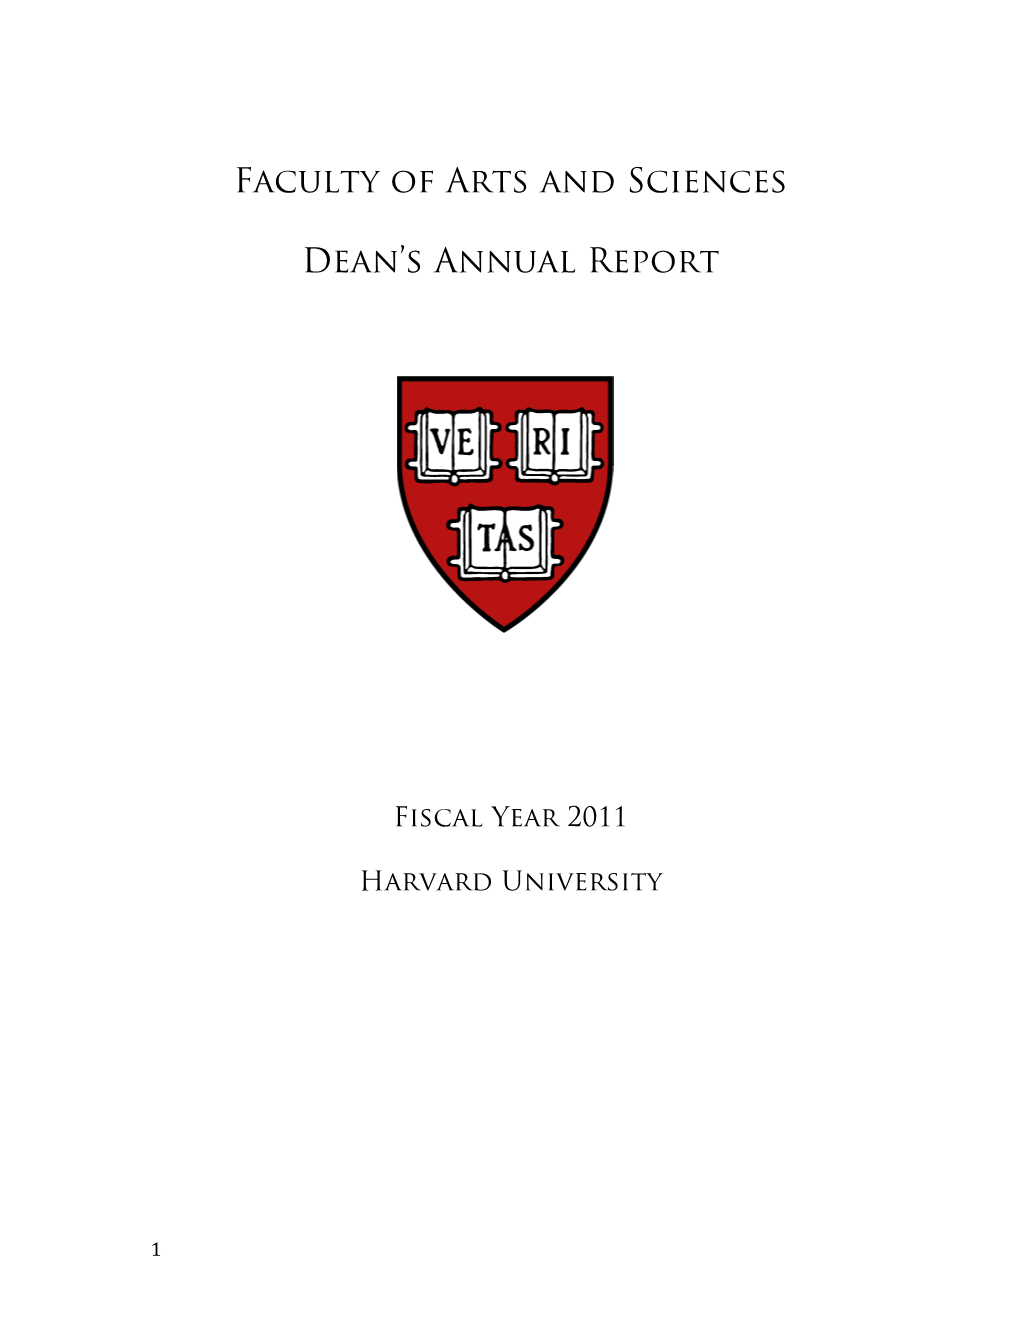 Faculty of Arts and Sciences Dean's Annual Report